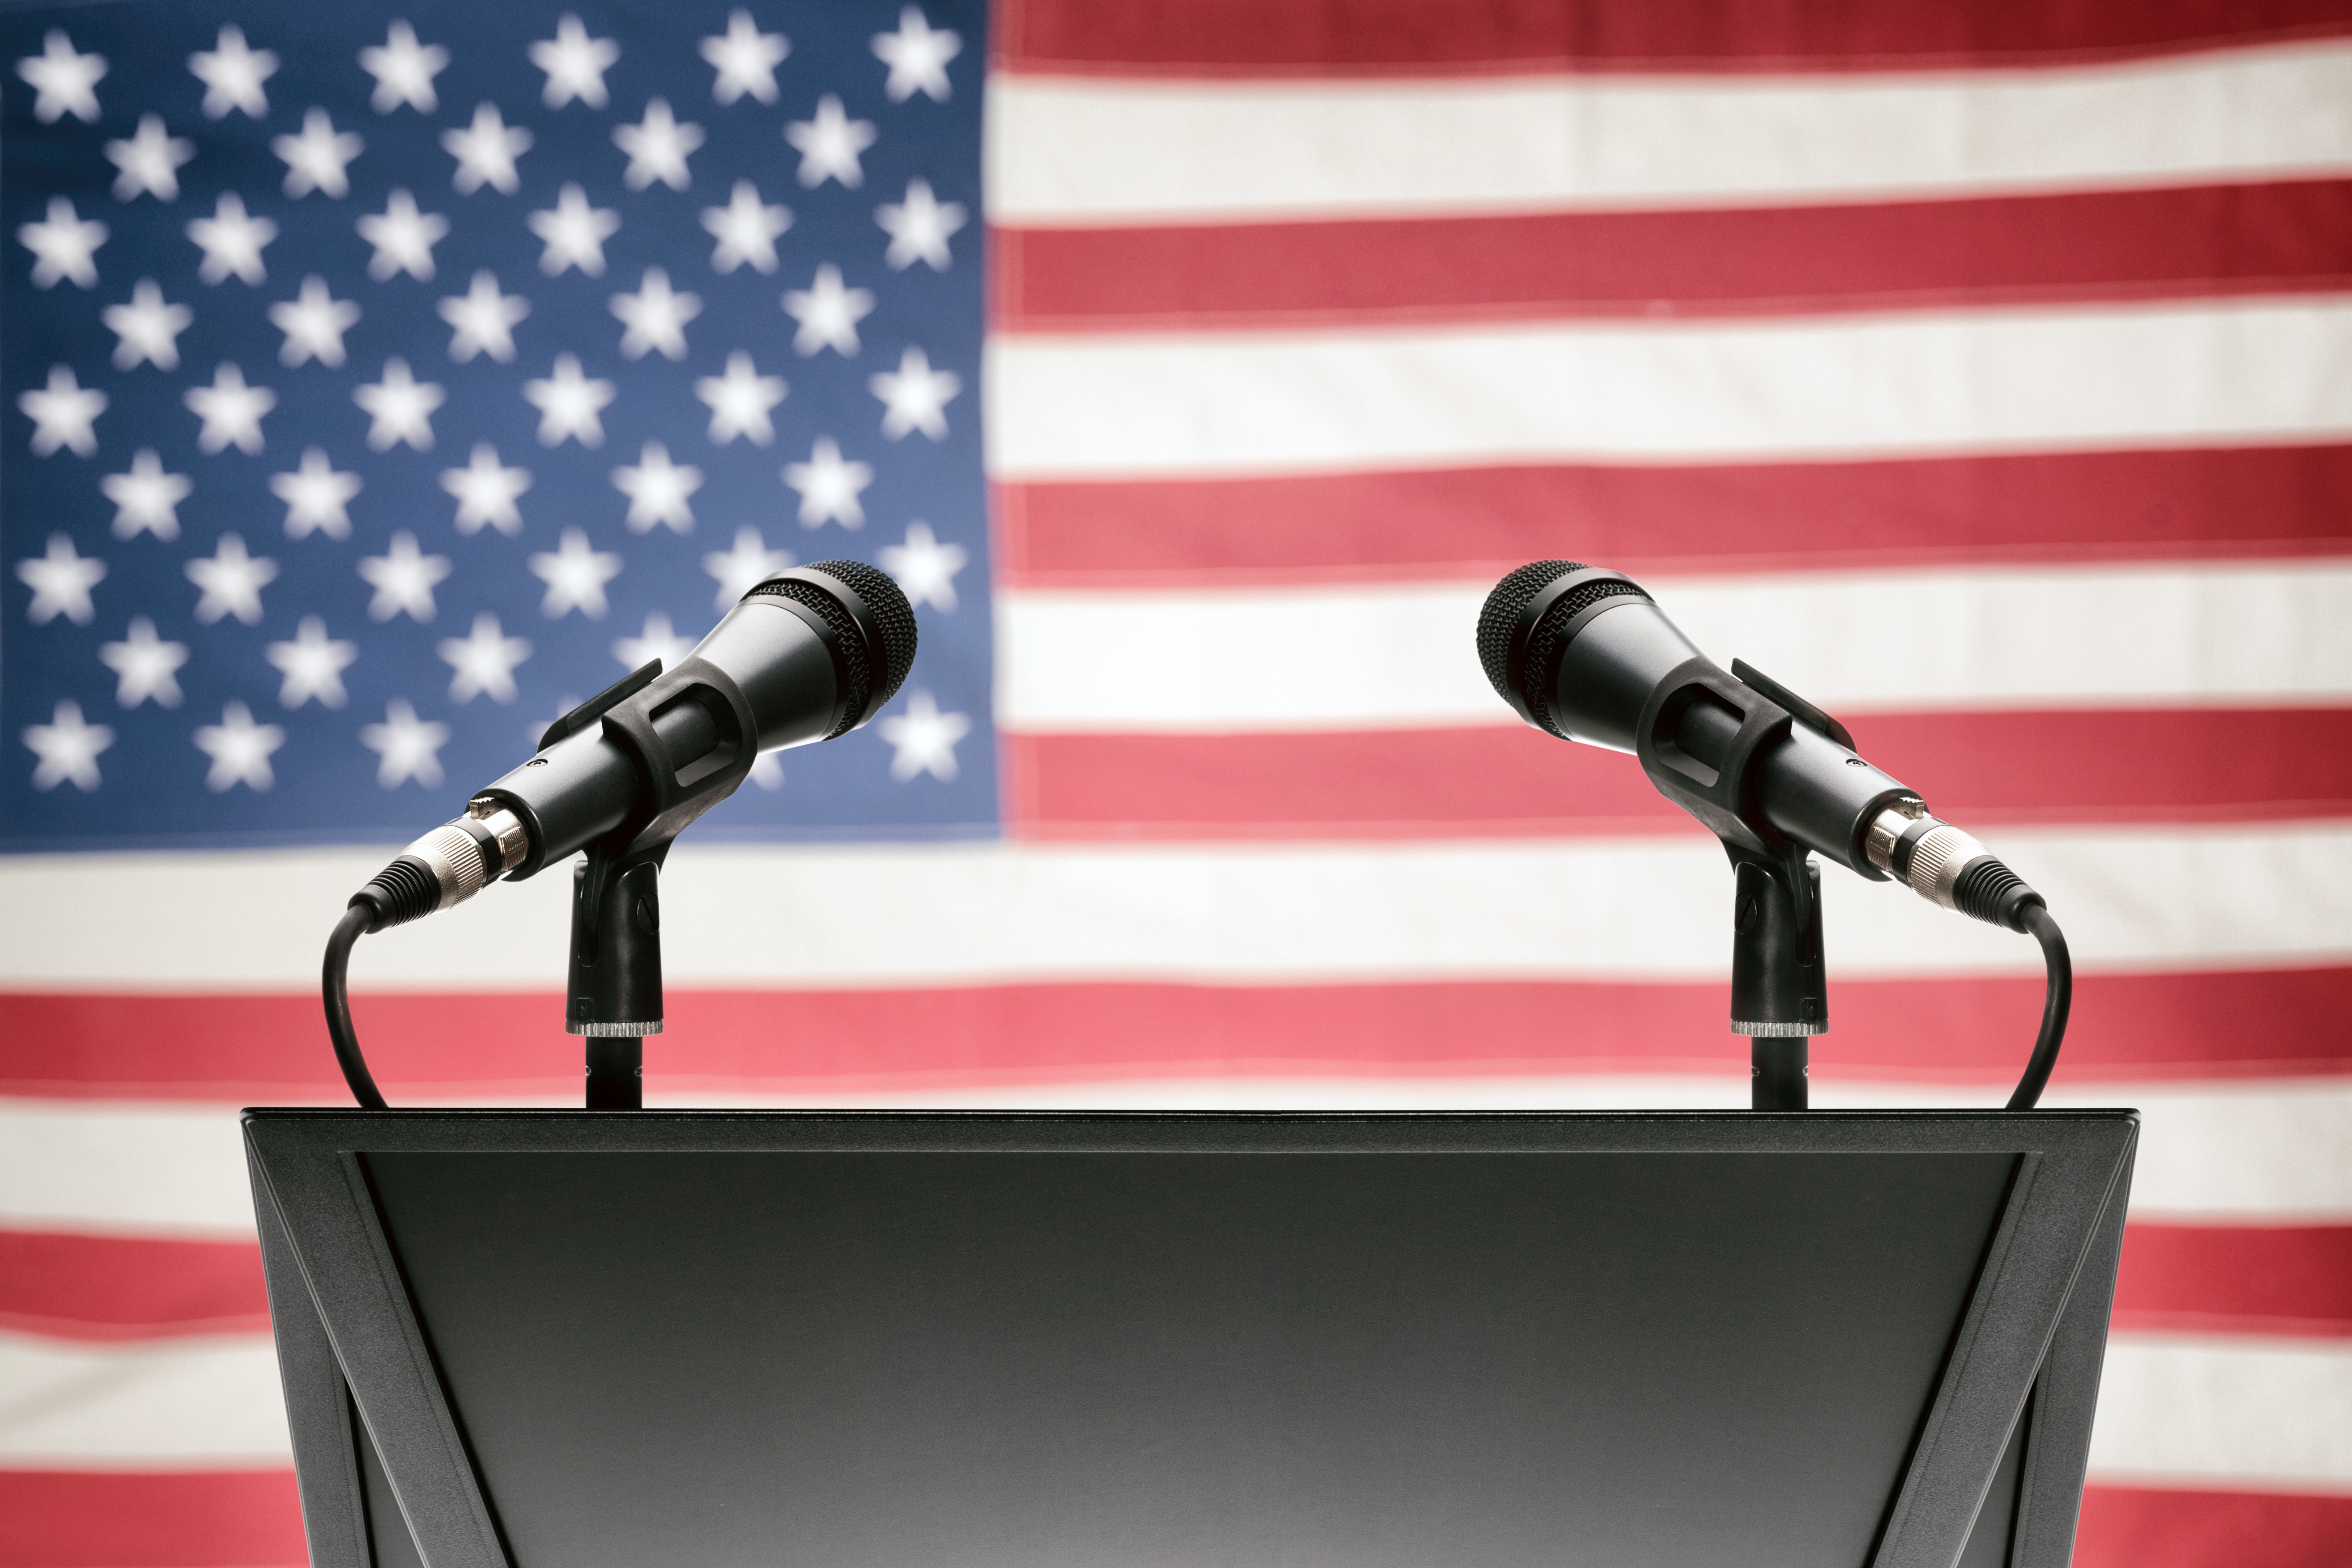 two microphones on a lectern with the American flag in the backgrounf